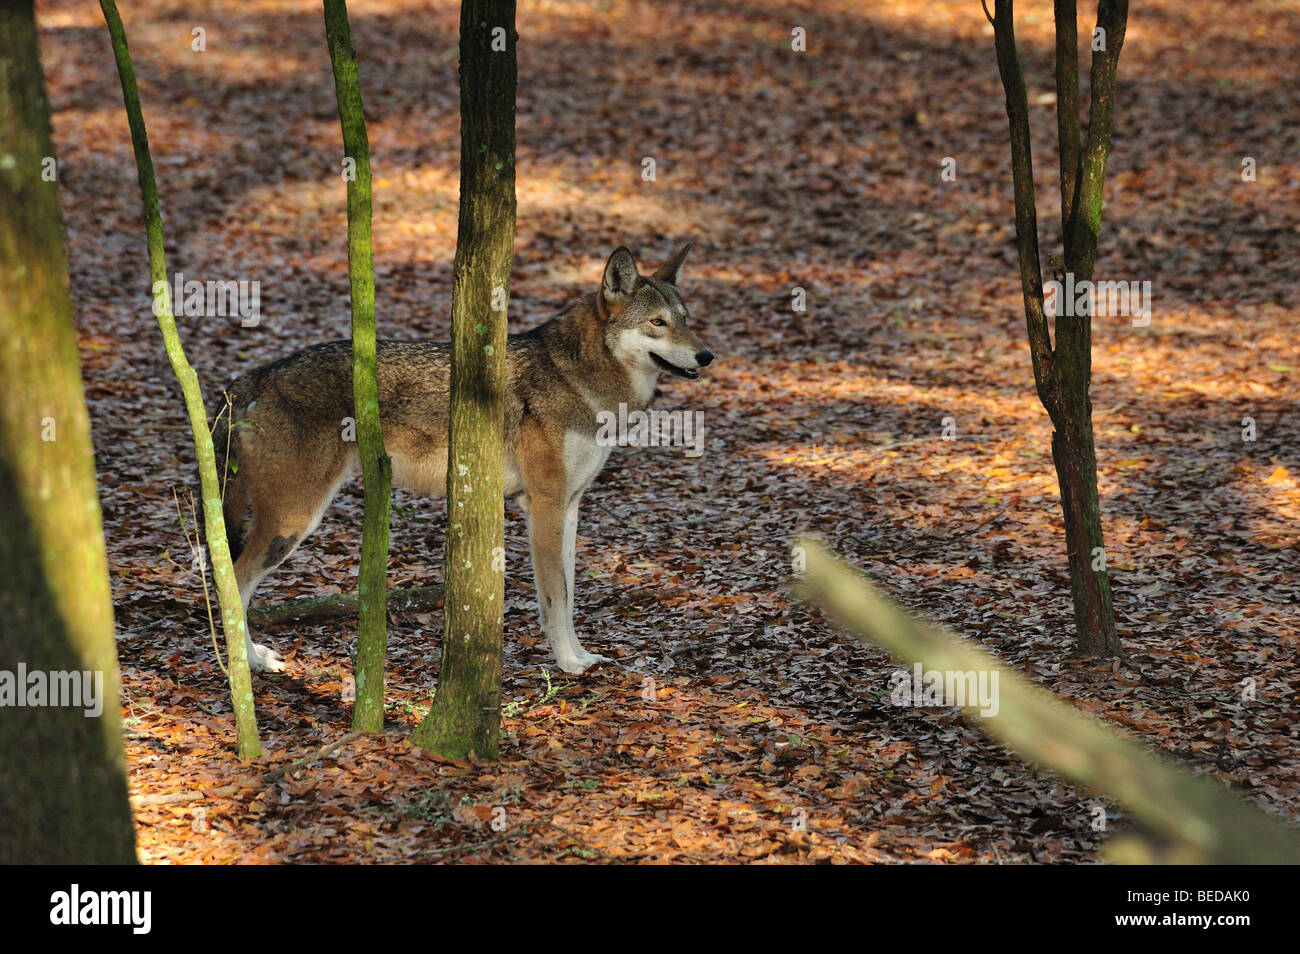 Red Wolf, Canis Rufus, Florida (Captive) Stockfoto